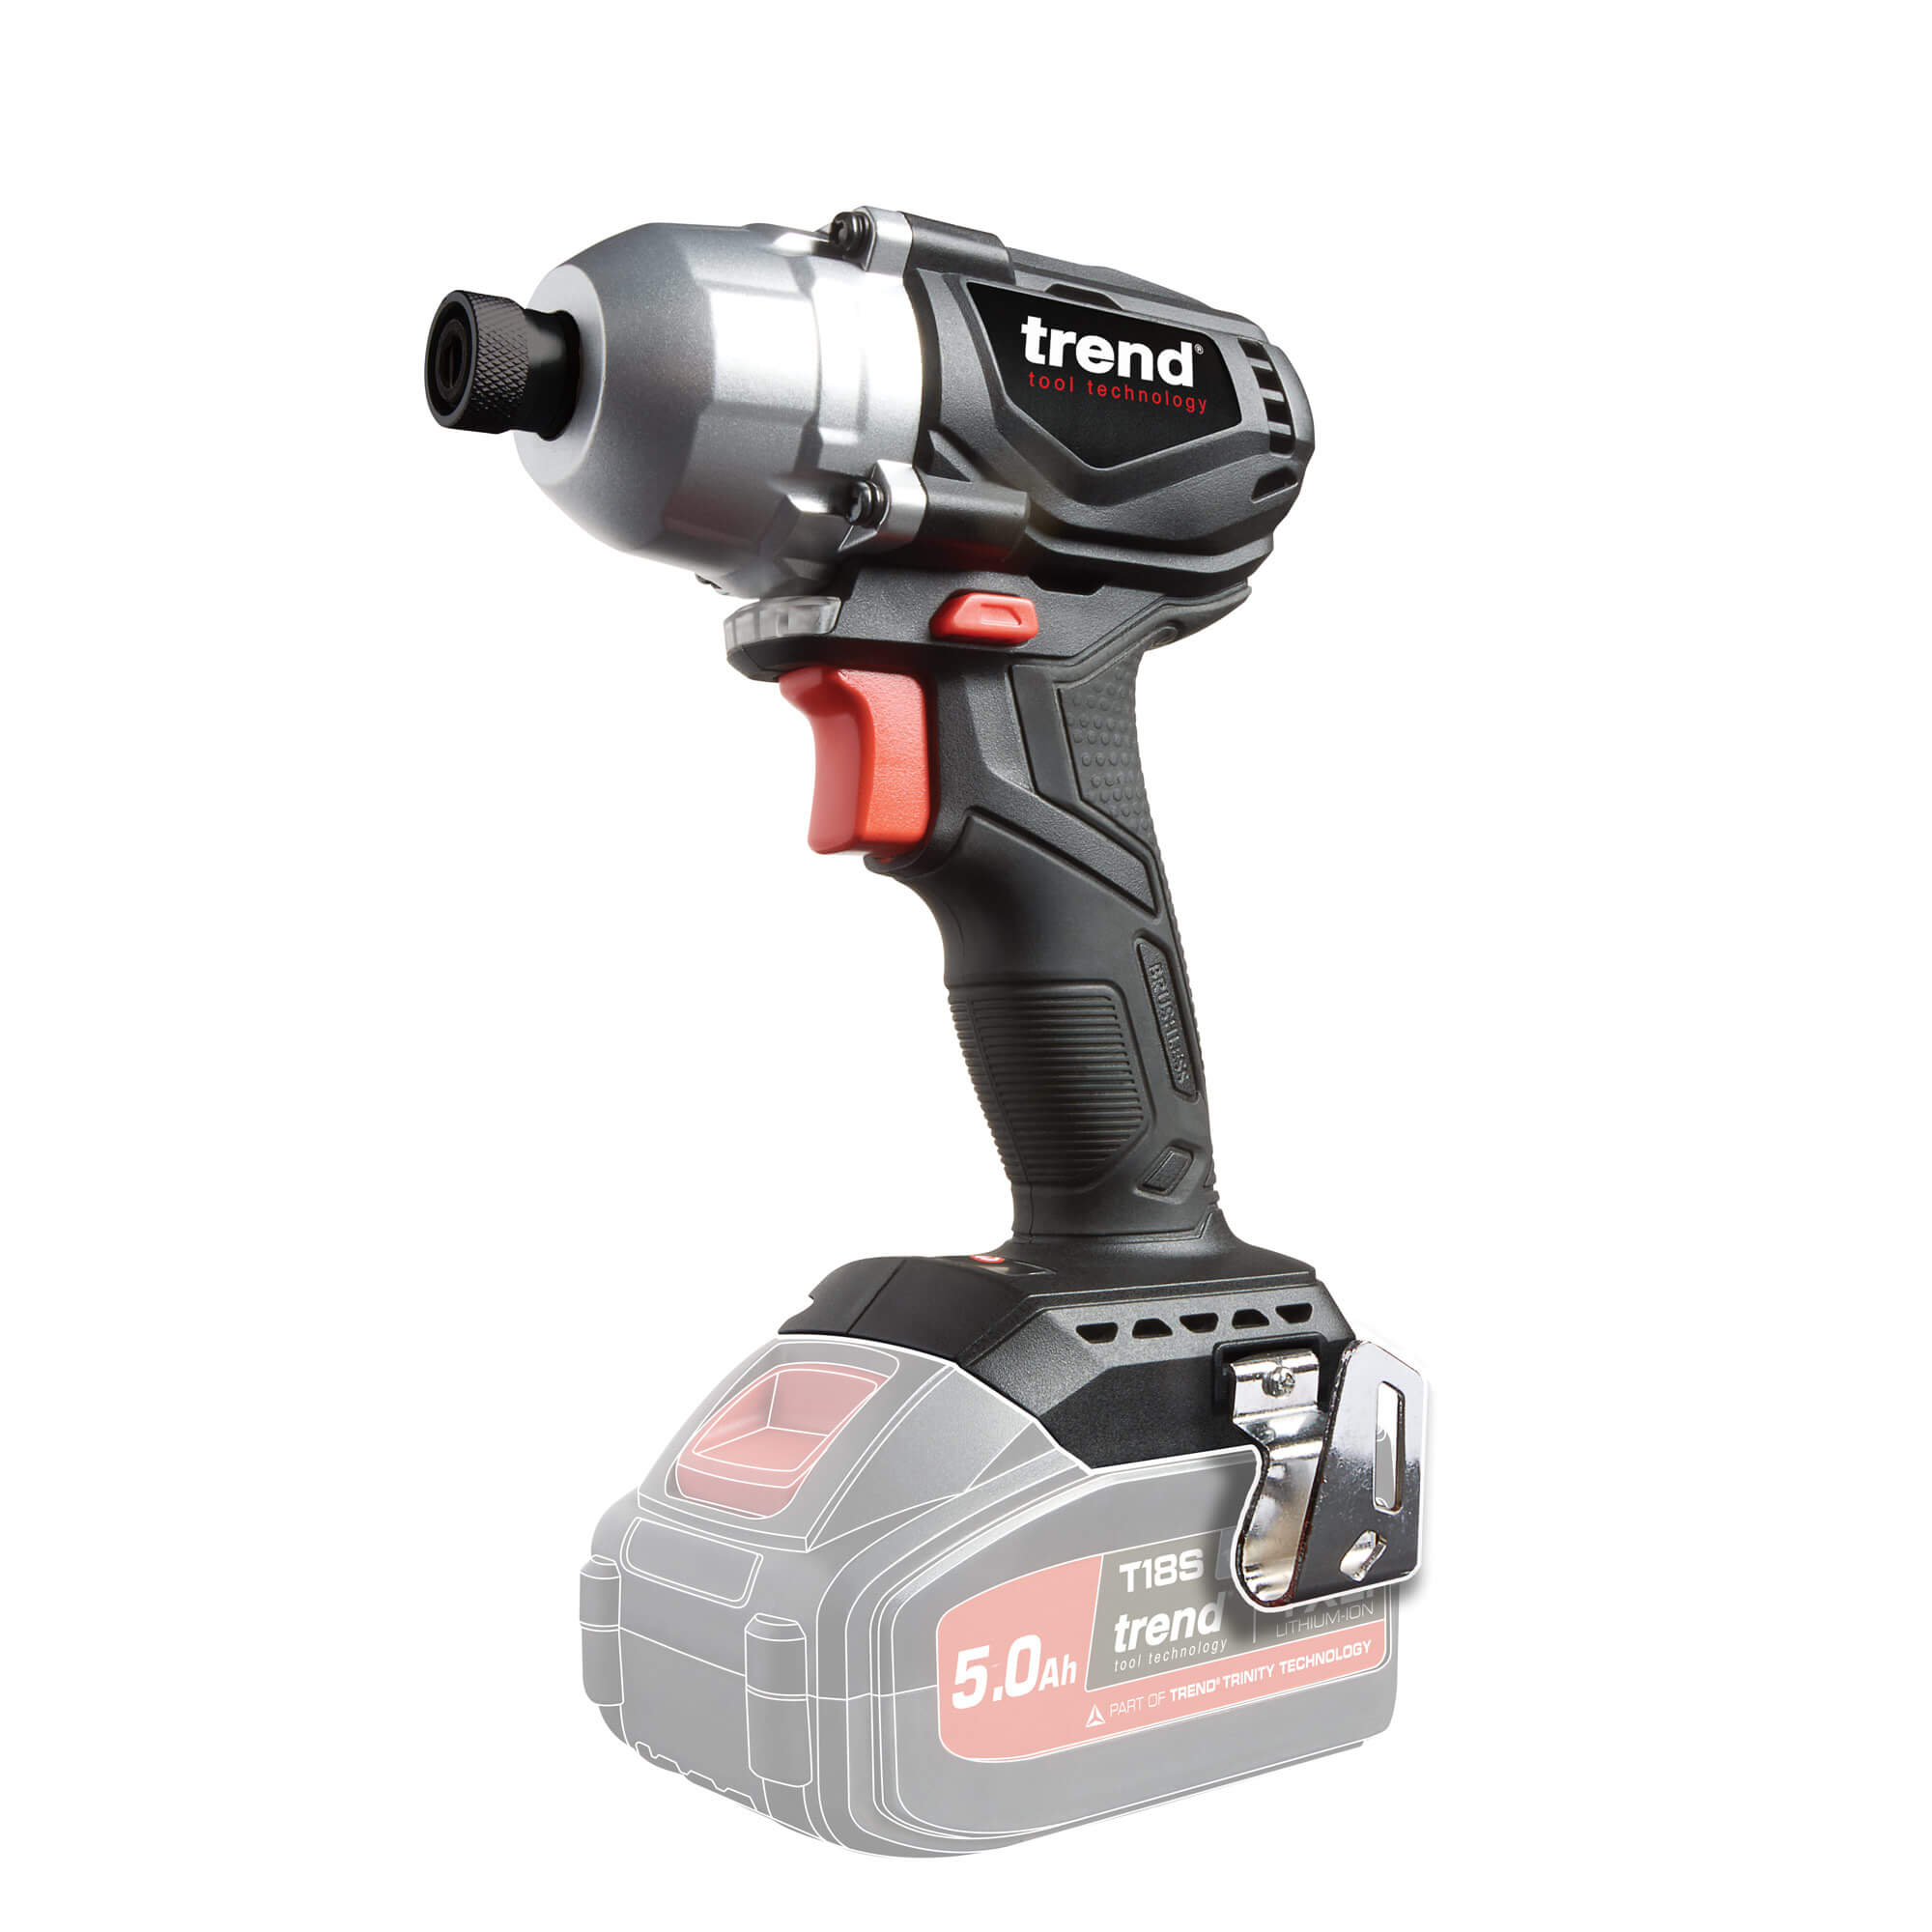 Photo of Trend T18s/idb 18v Cordless Brushless Impact Driver No Batteries No Charger No Case